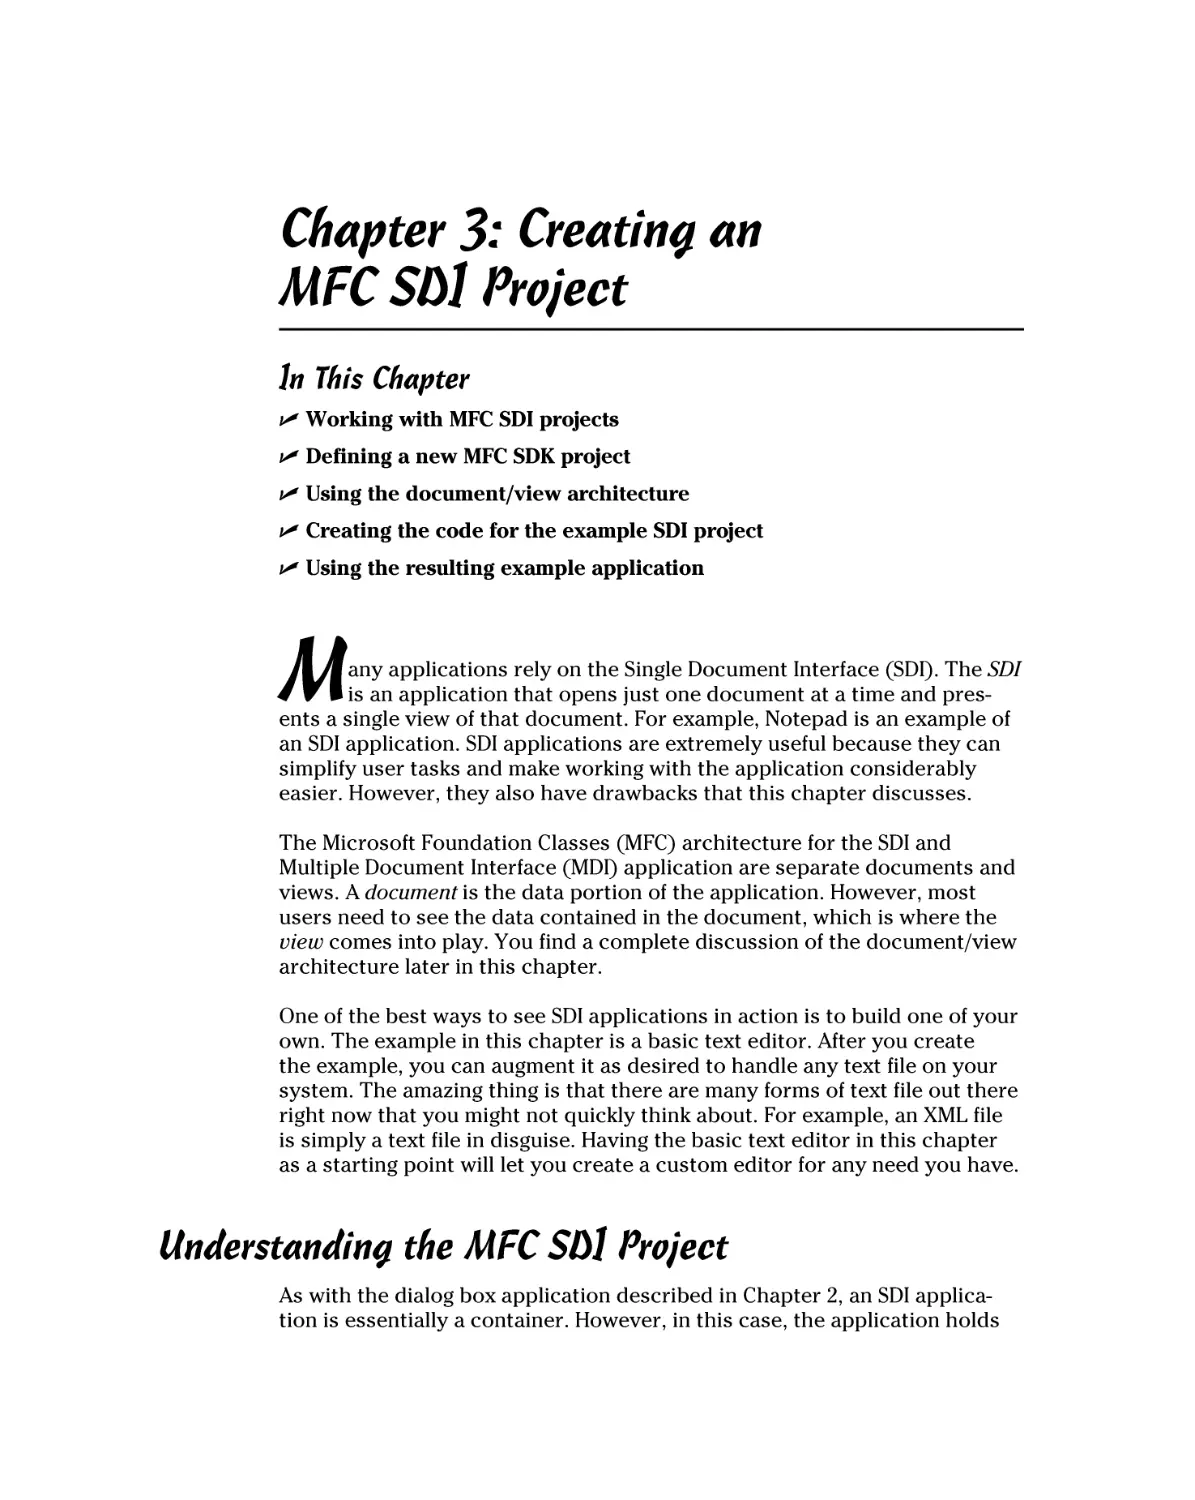 Chapter 3
Understanding the MFC SDI Project